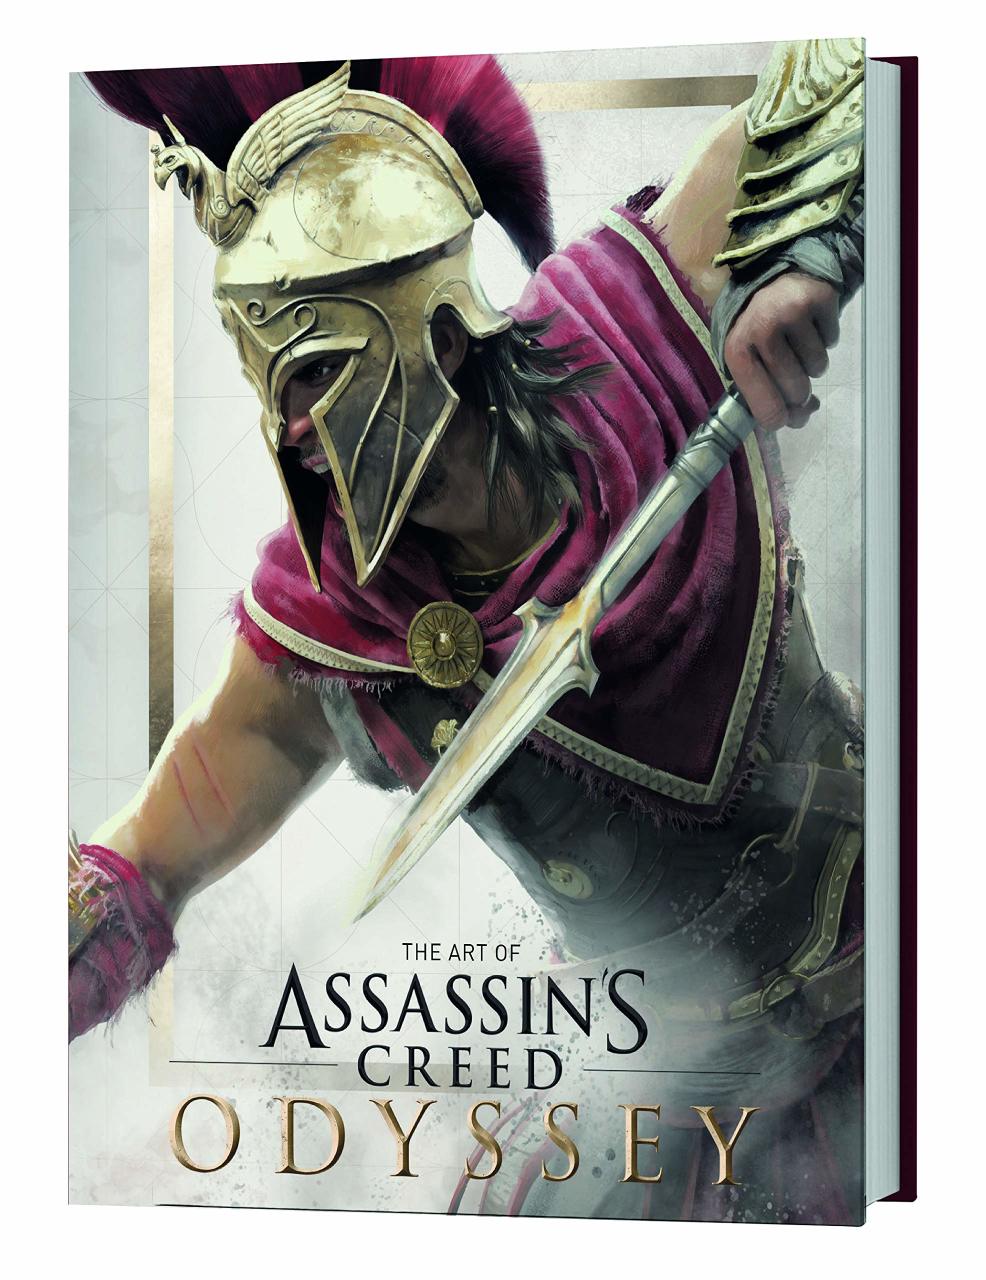 The Art of Assassins Creed Odyssey